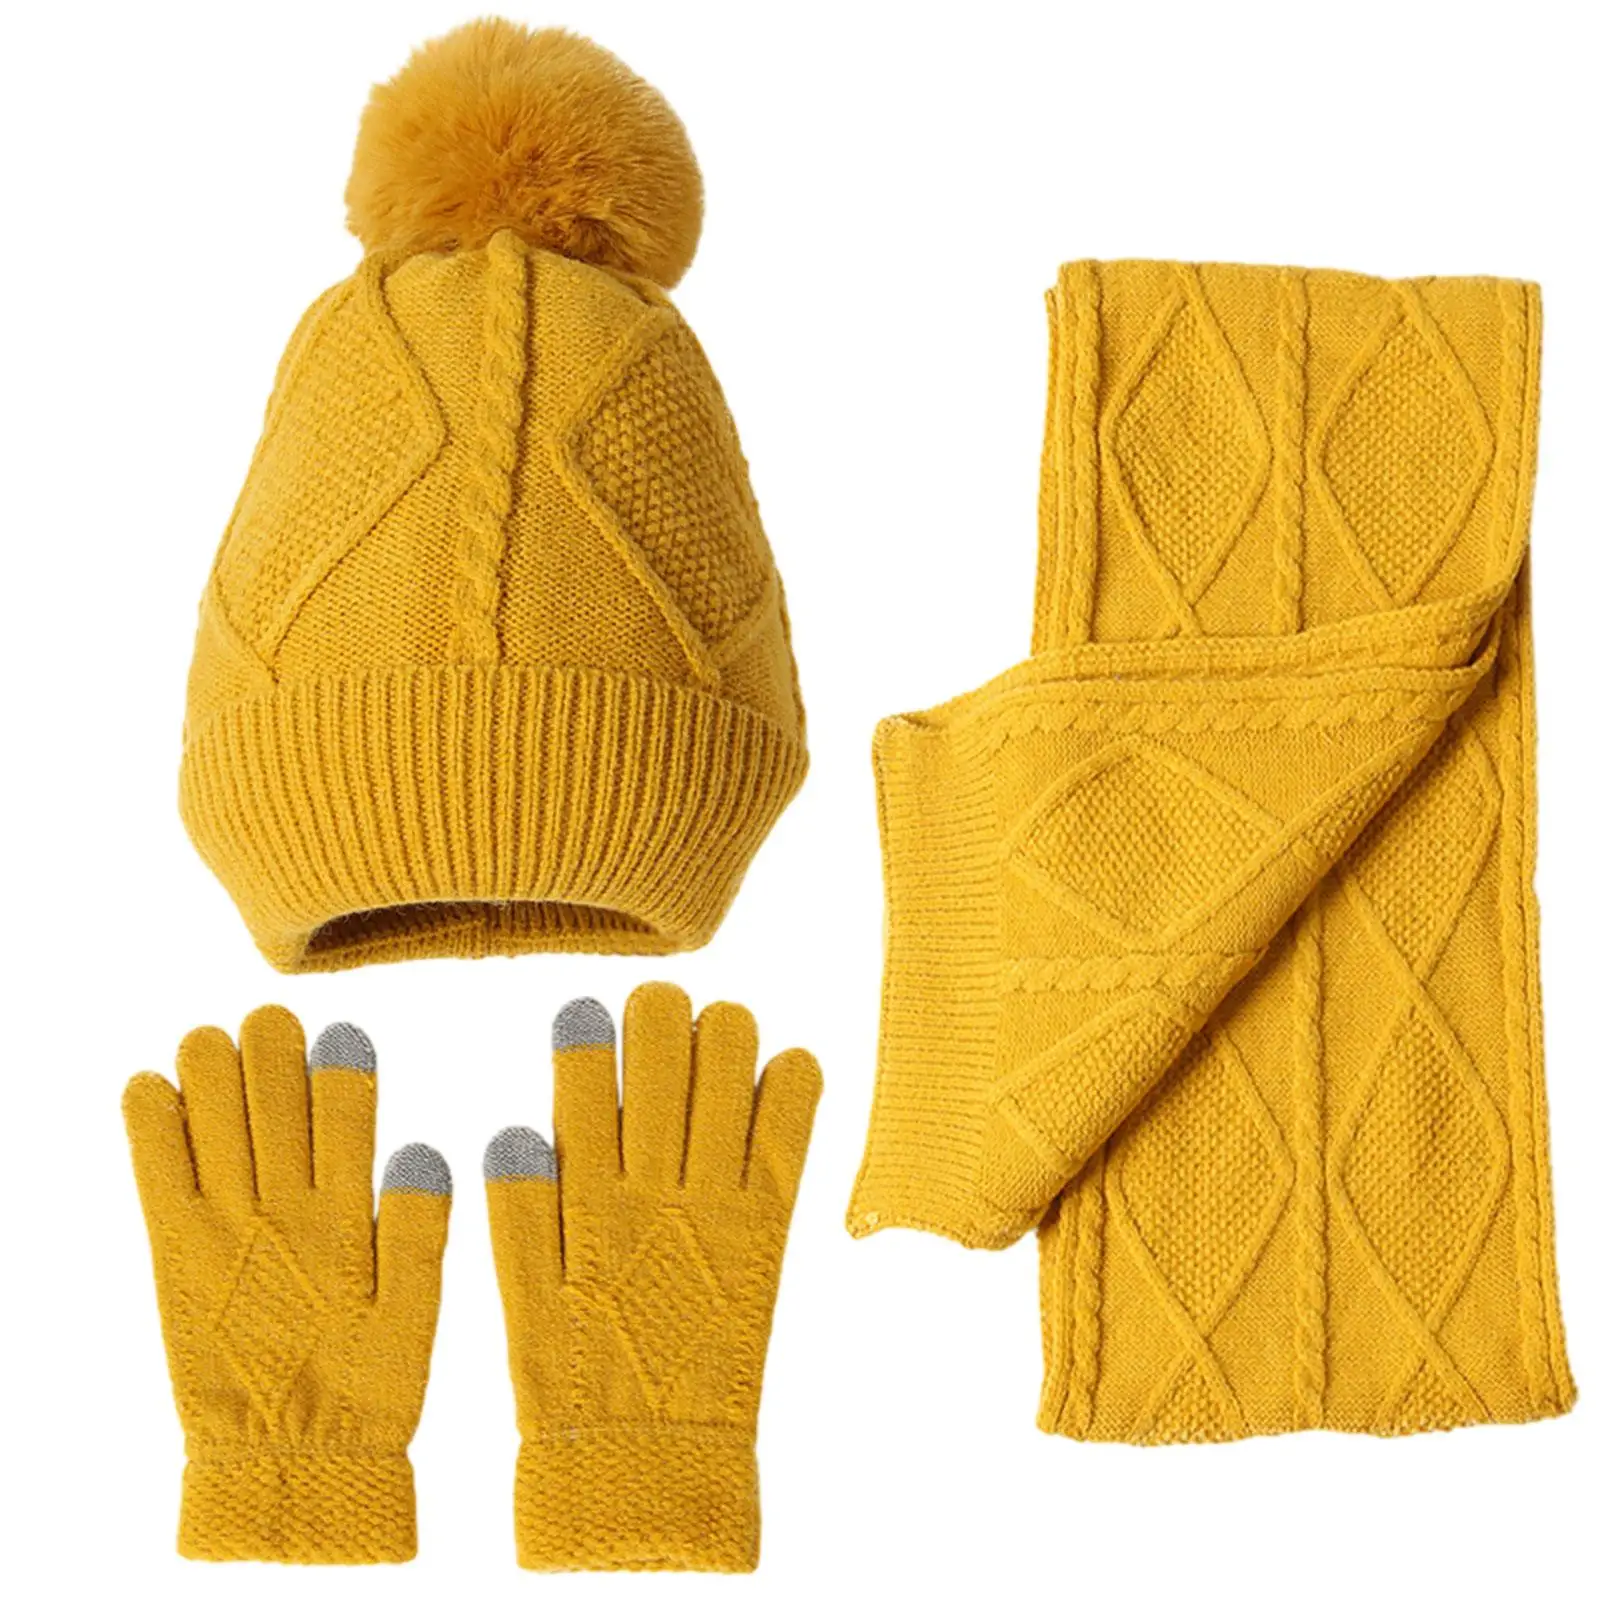 Winter Hat Scarf Gloves Set Warm Hat Men Women for Cold Weather Gifts Long Scarf for Running Party Skiing Skating Outdoor Sports